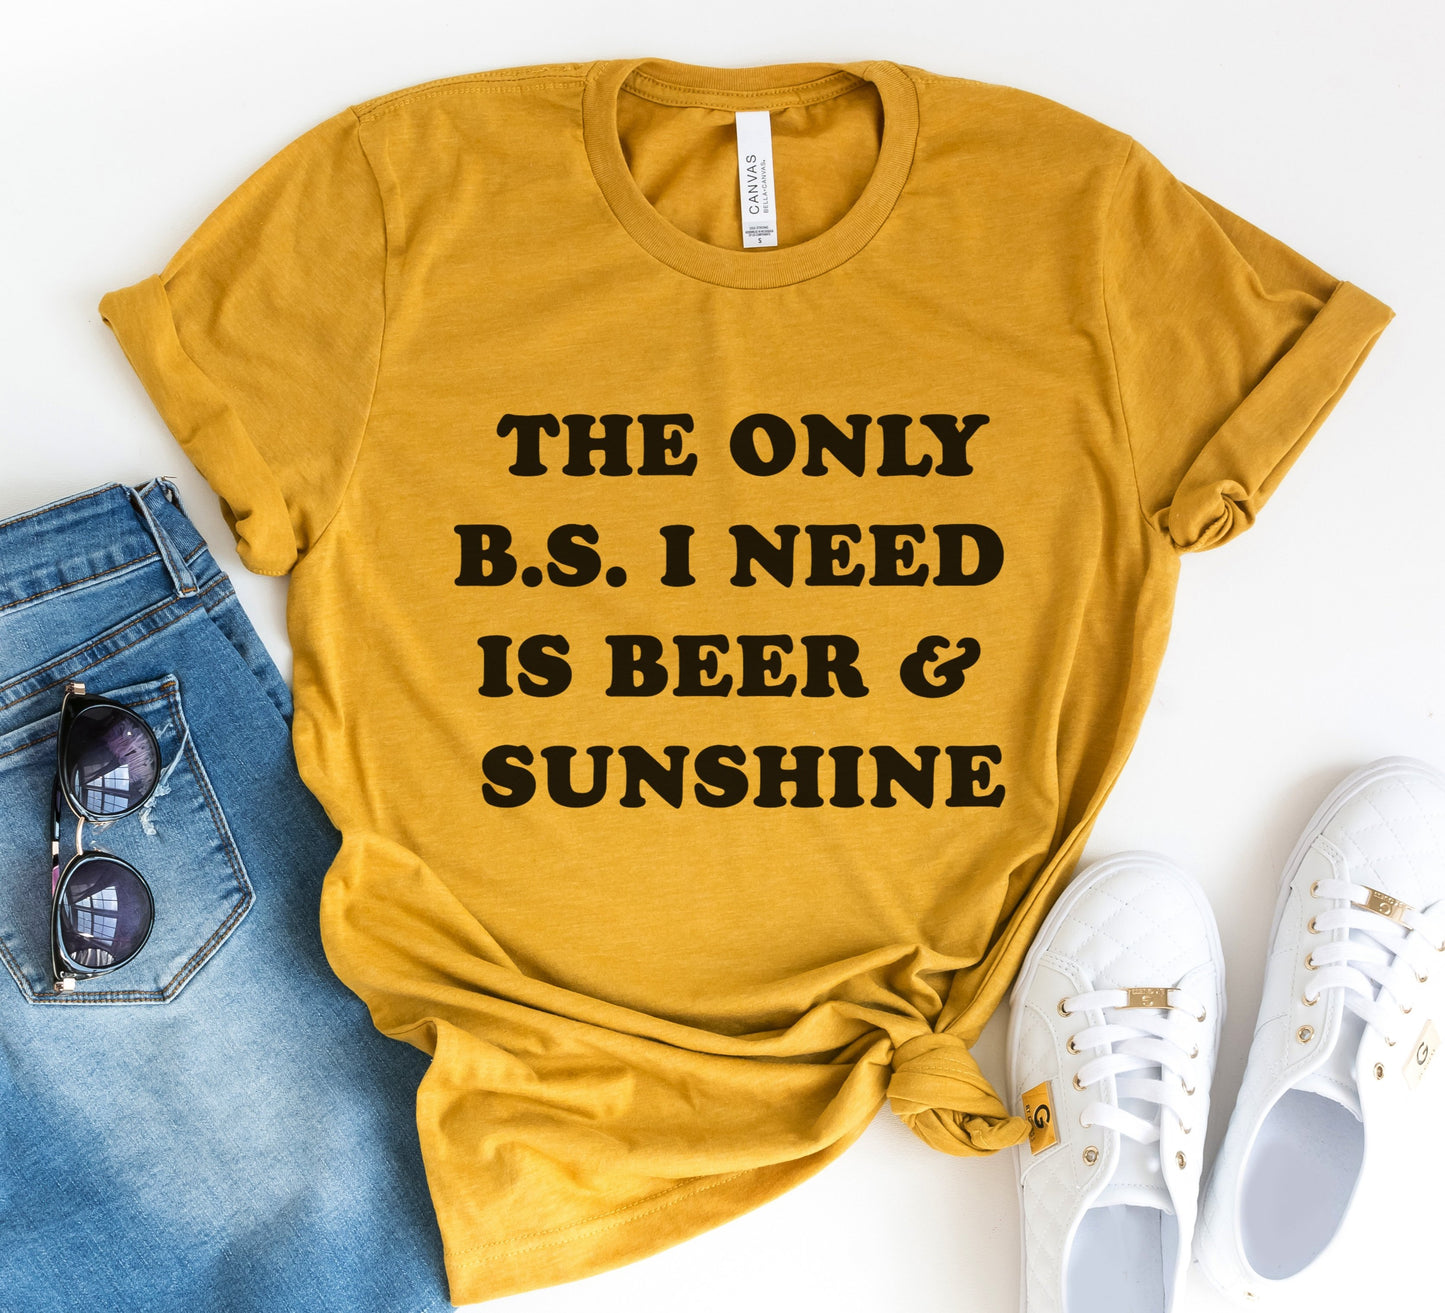 The Only B.S. I Need Is Beer & Sunshine Tee